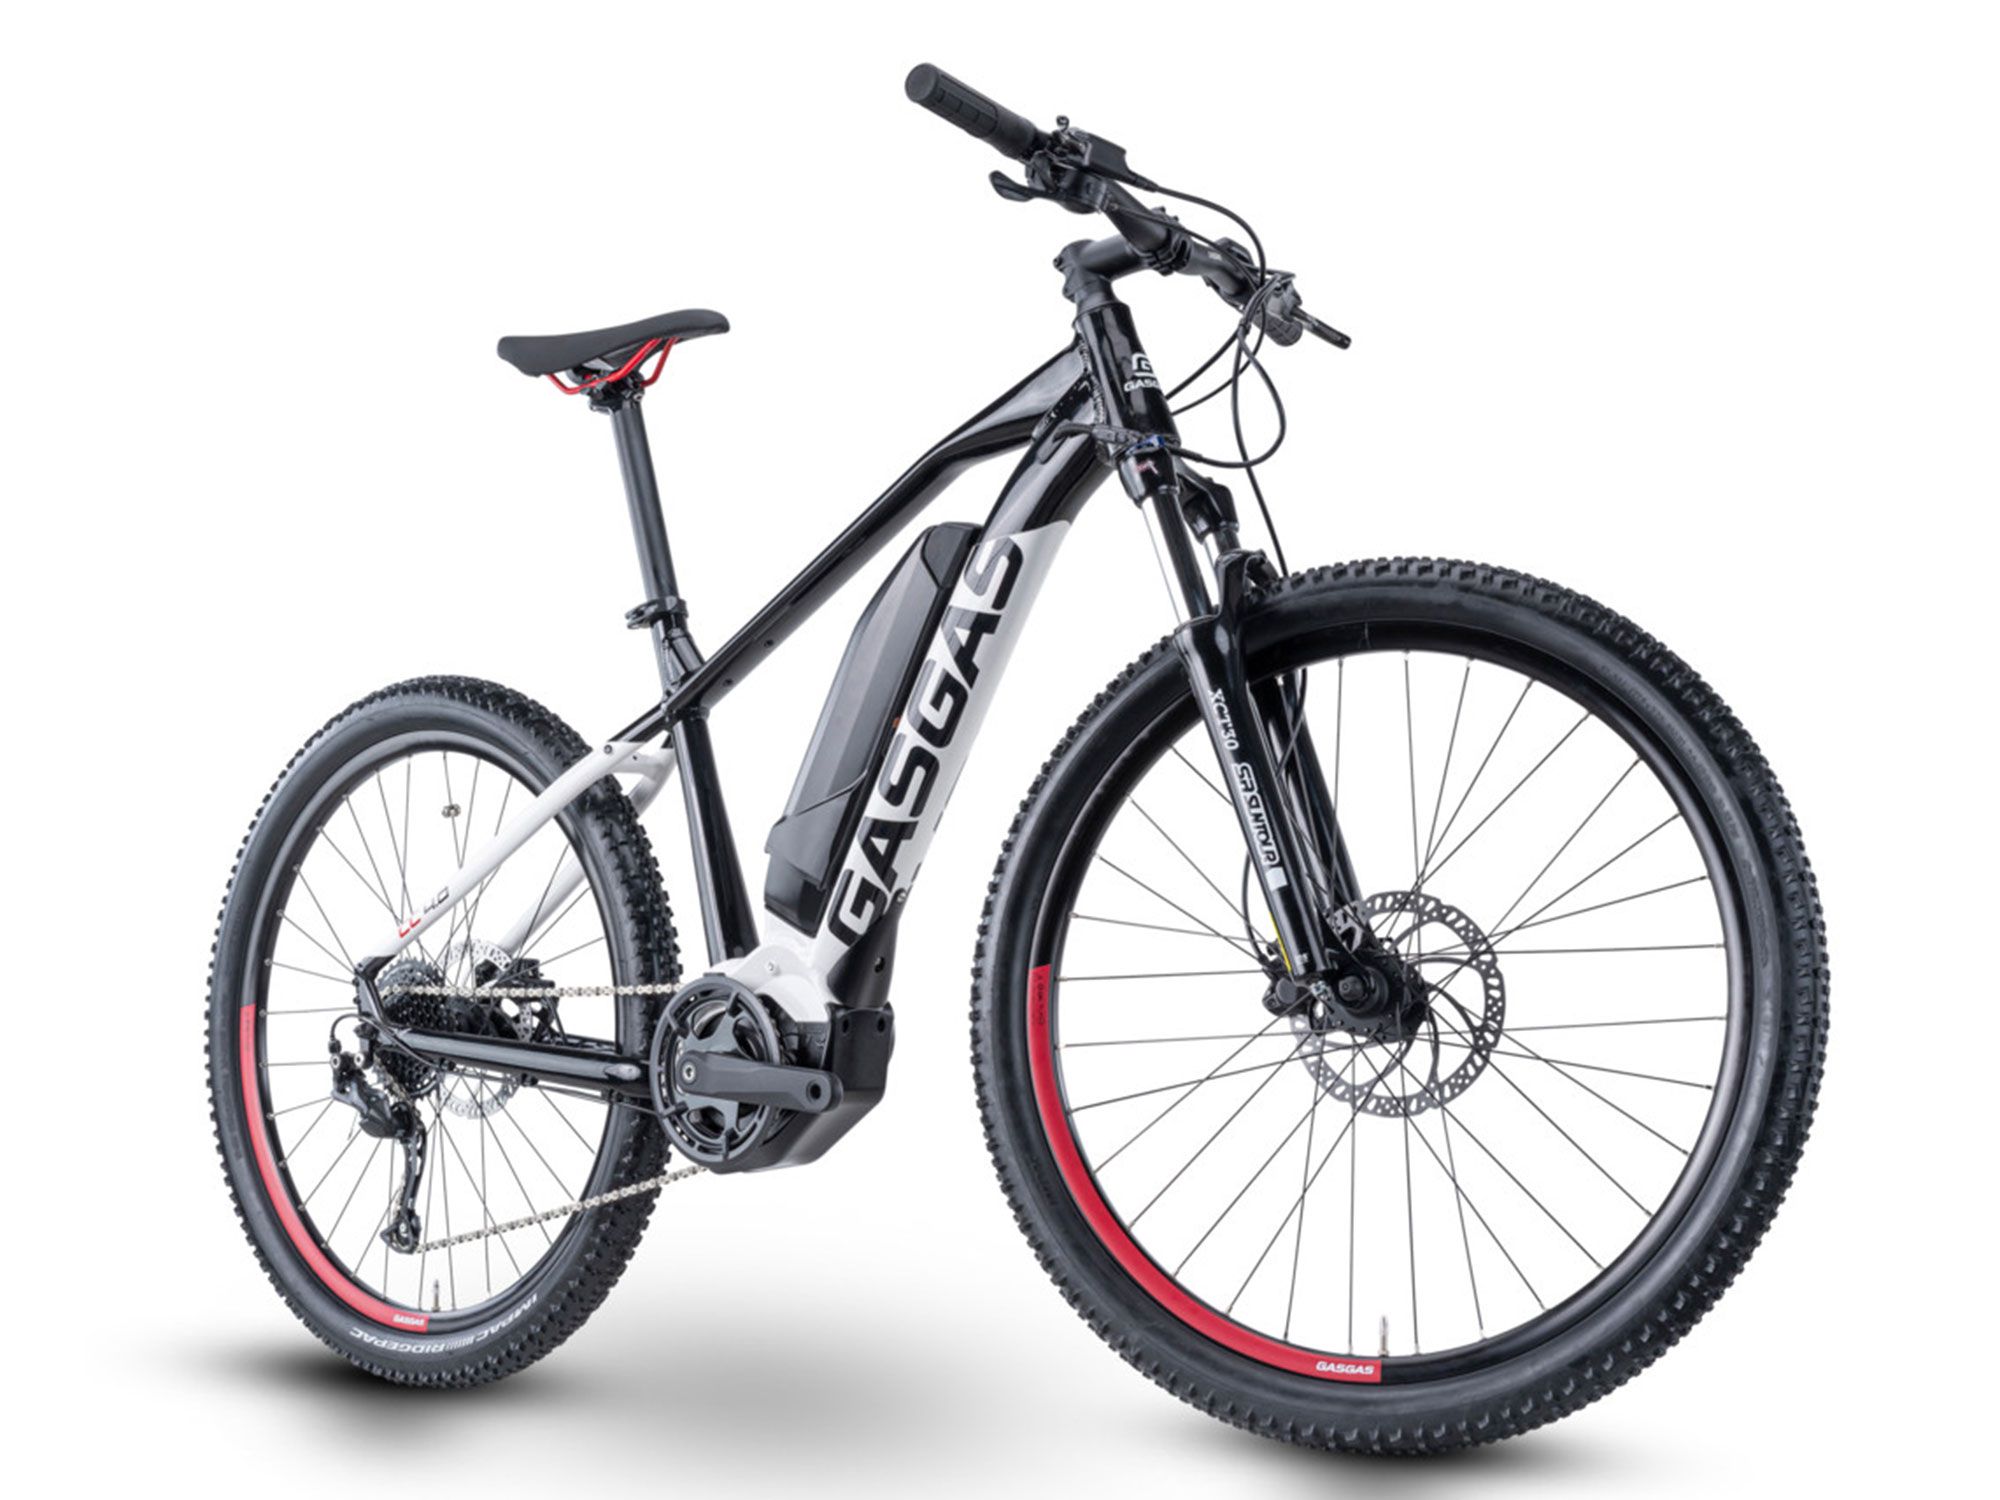 The Cross Country 4.0 is an uncomplicated ebike for riders who want a dependable all-arounder.